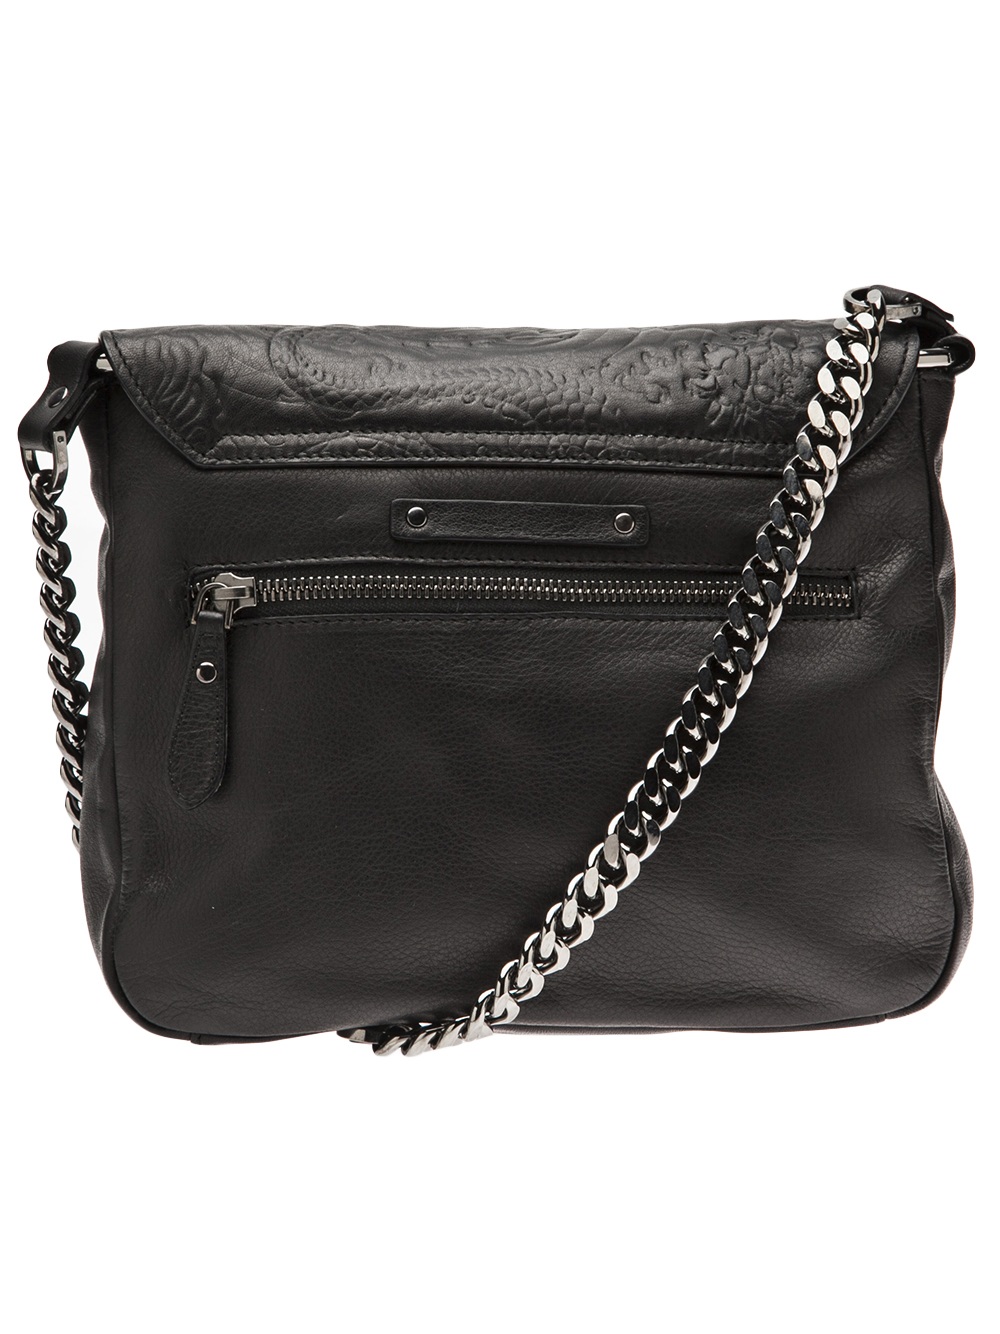 Lyst - Jean paul gaultier Small Square Tattoo Bag in Black